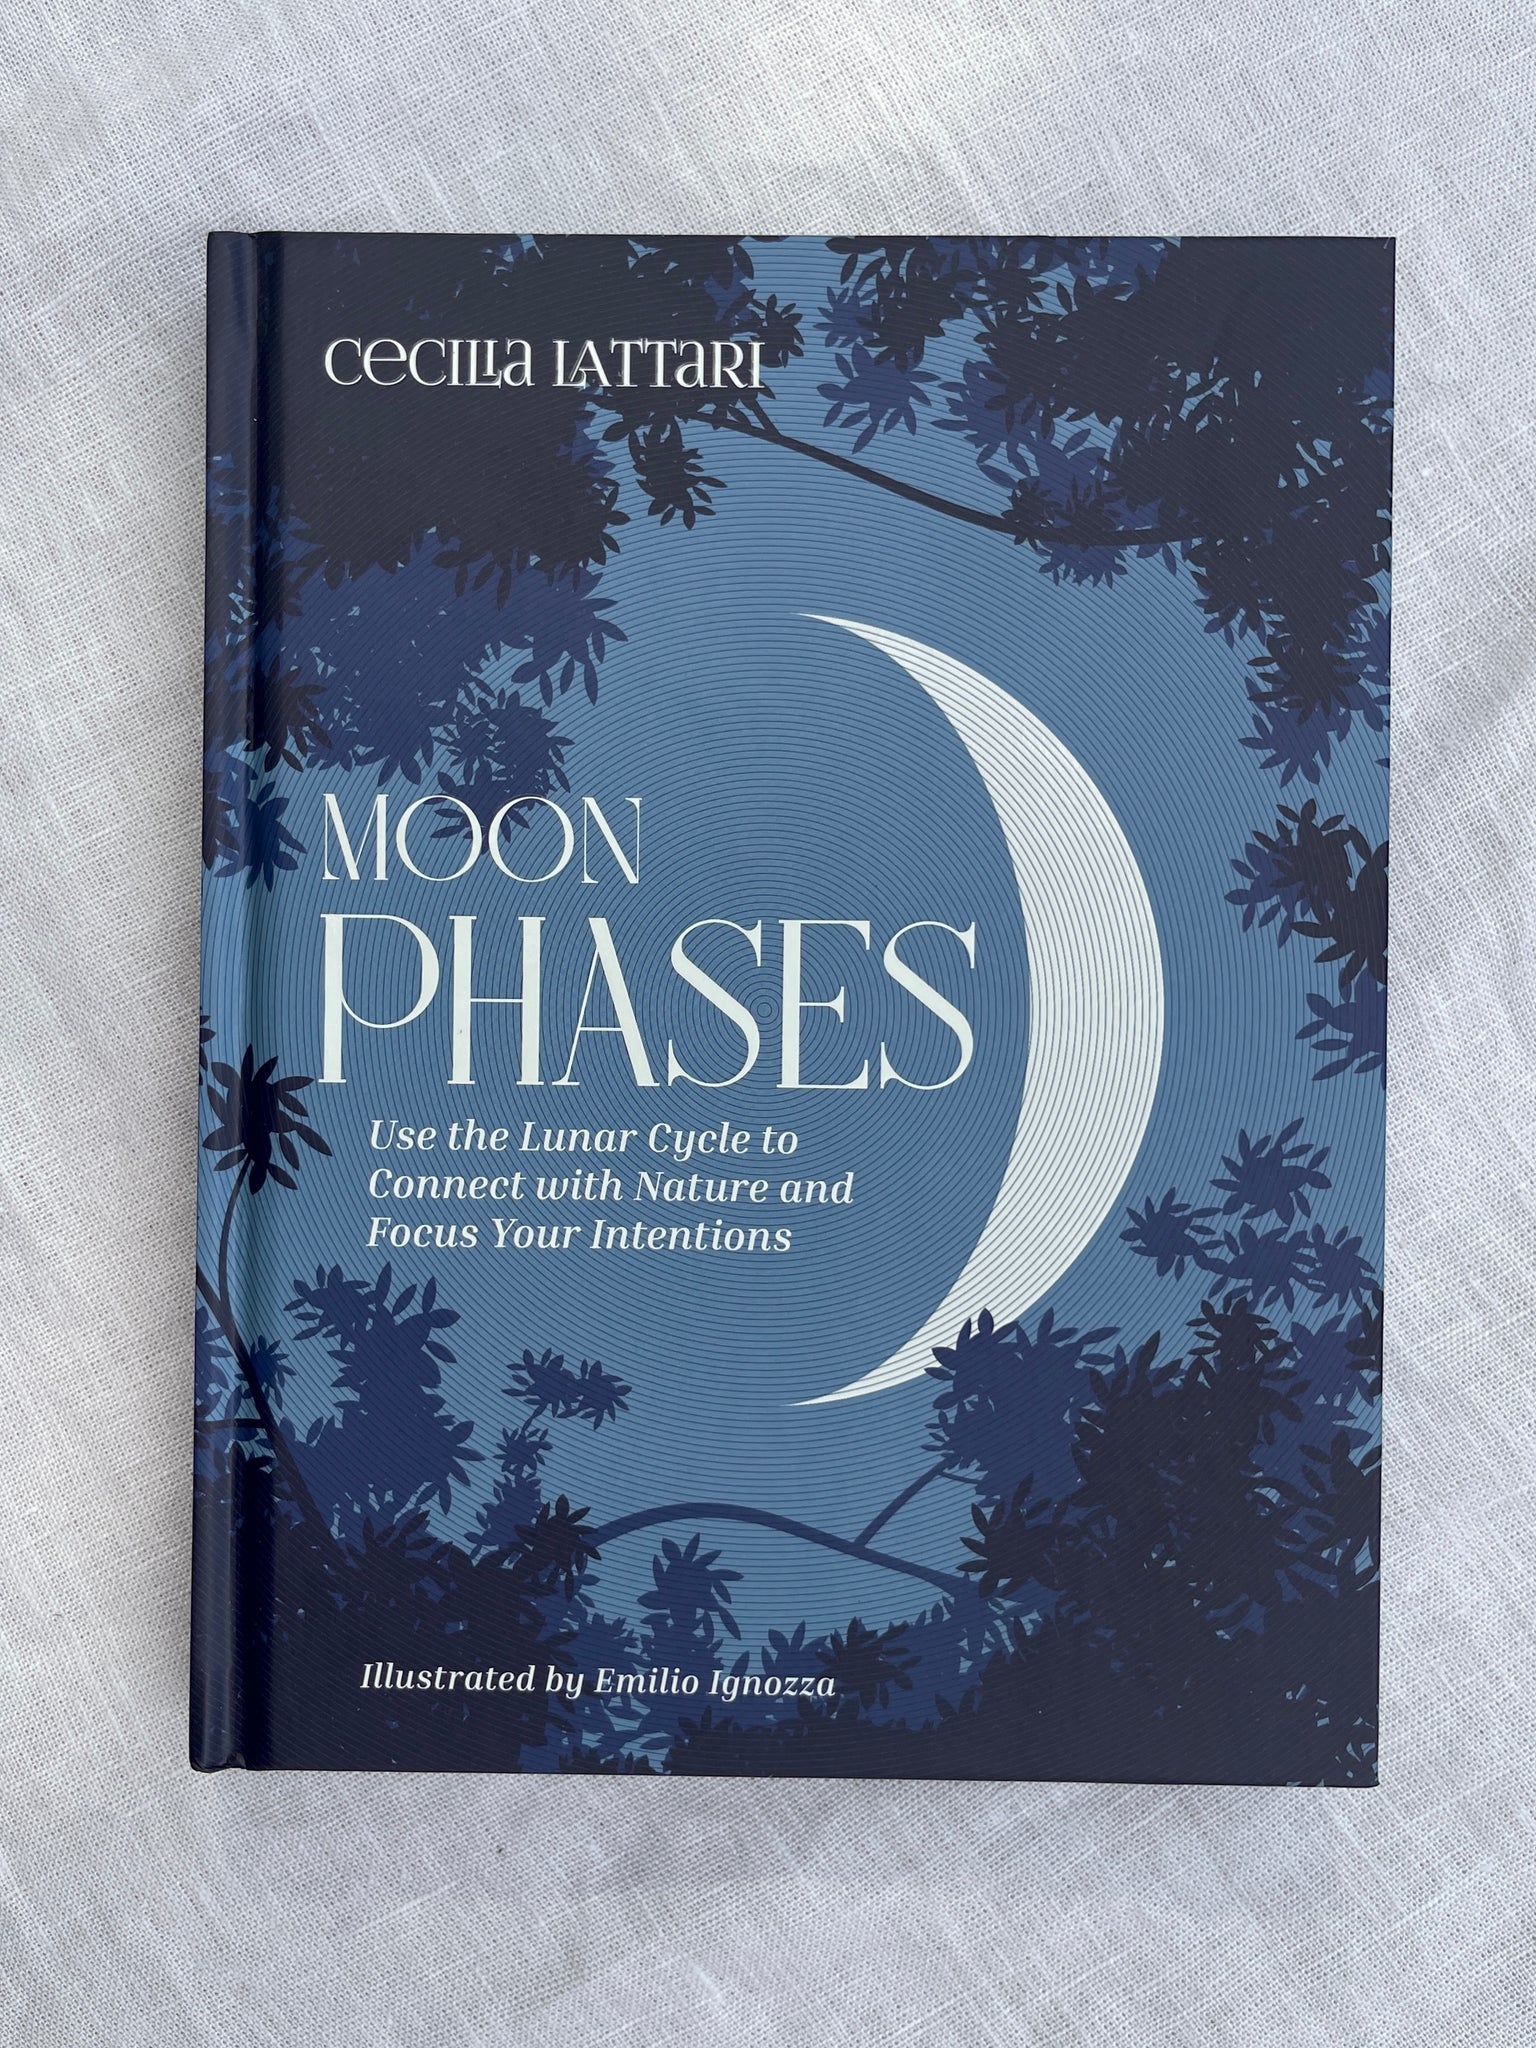 Moon Phases: Use the Lunar Cycle to Connect with Nature and Focus Your Intentions